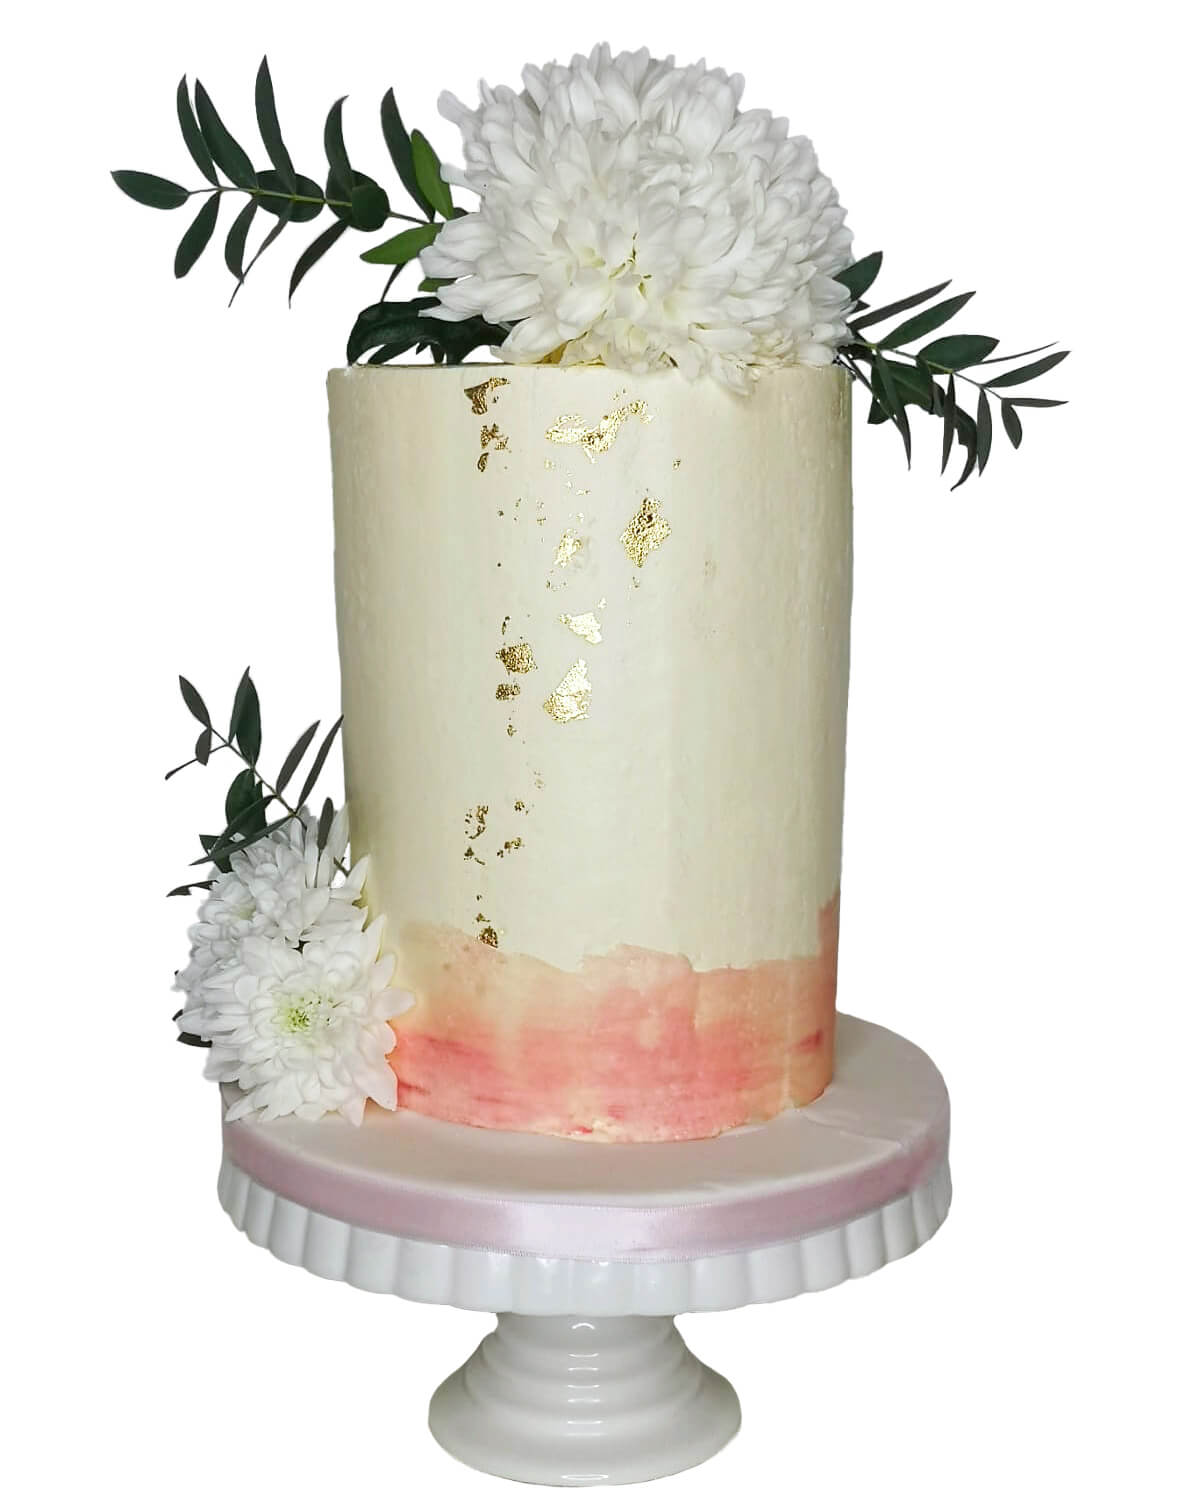 Buttercream cake 4 tier red floral – increased height – Get Caked by Lisa